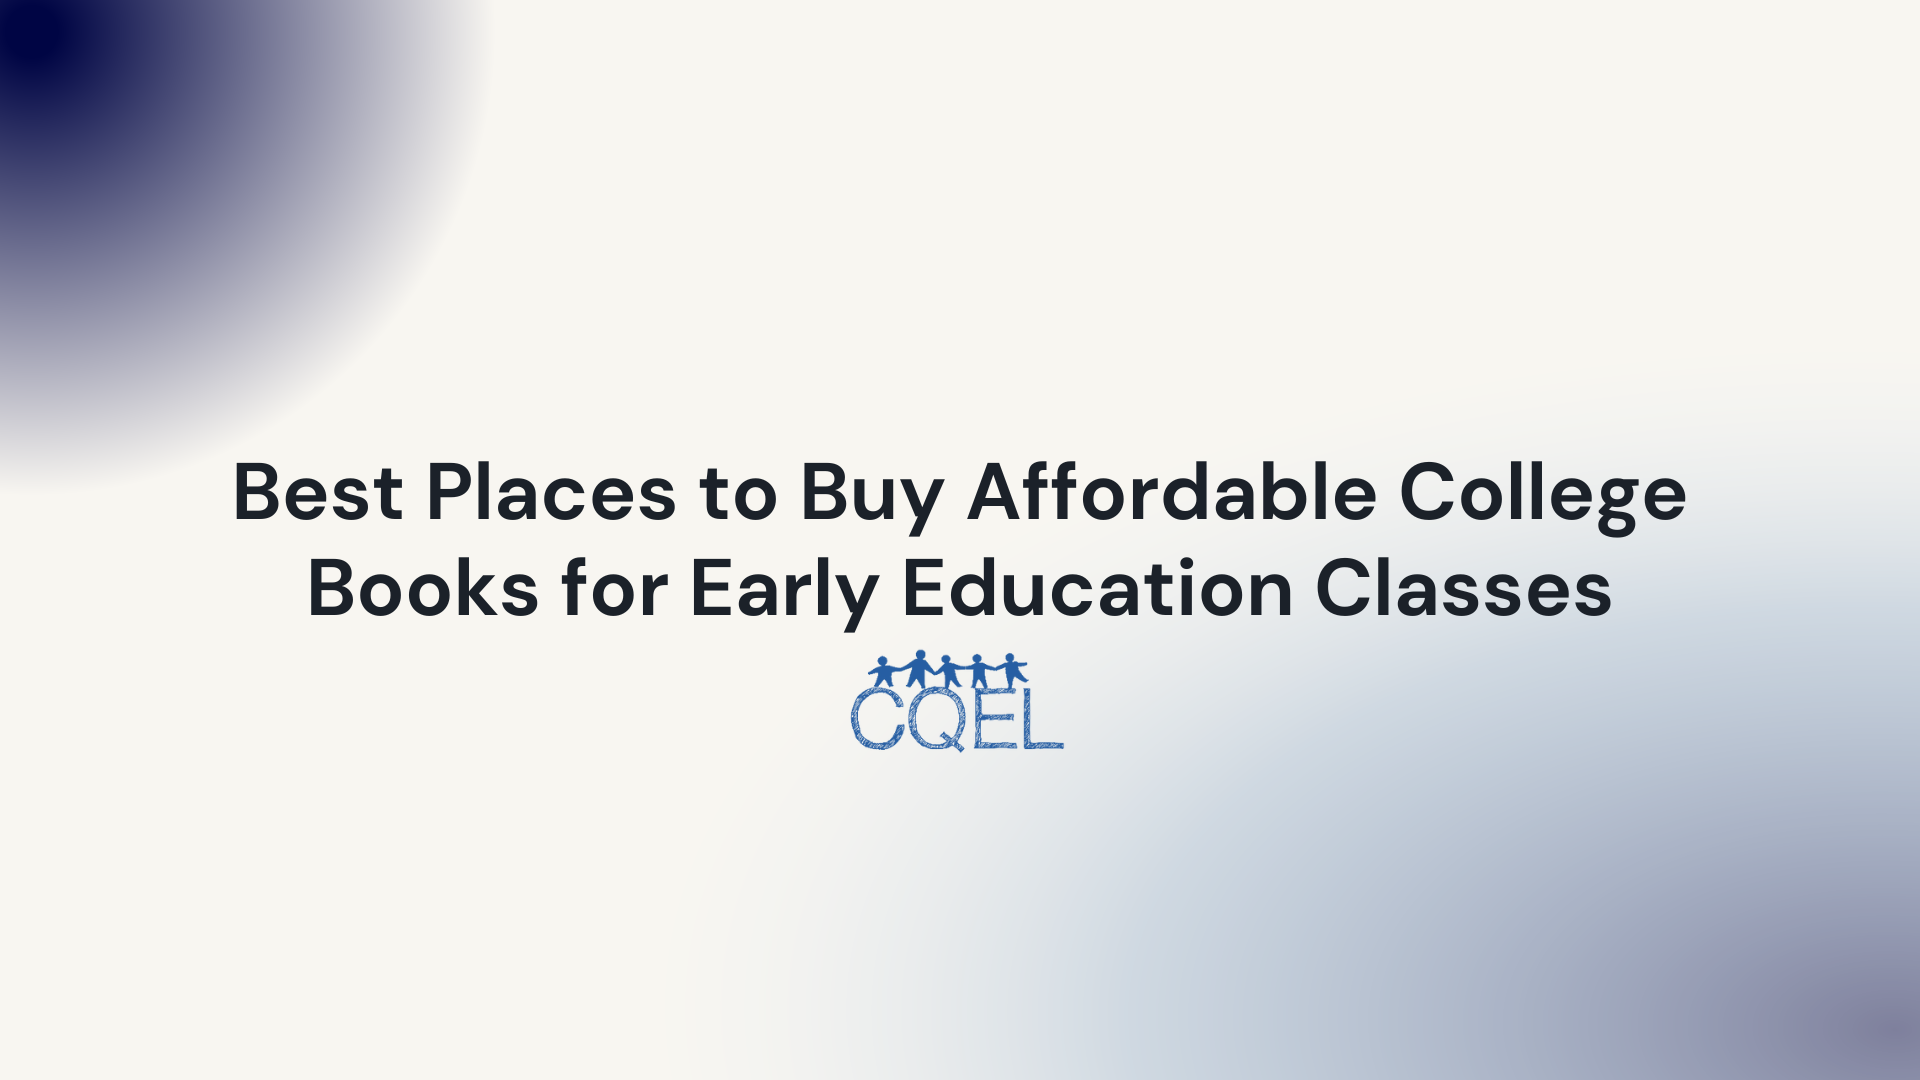 Best Places to Buy Affordable College Books for Early Education Classes